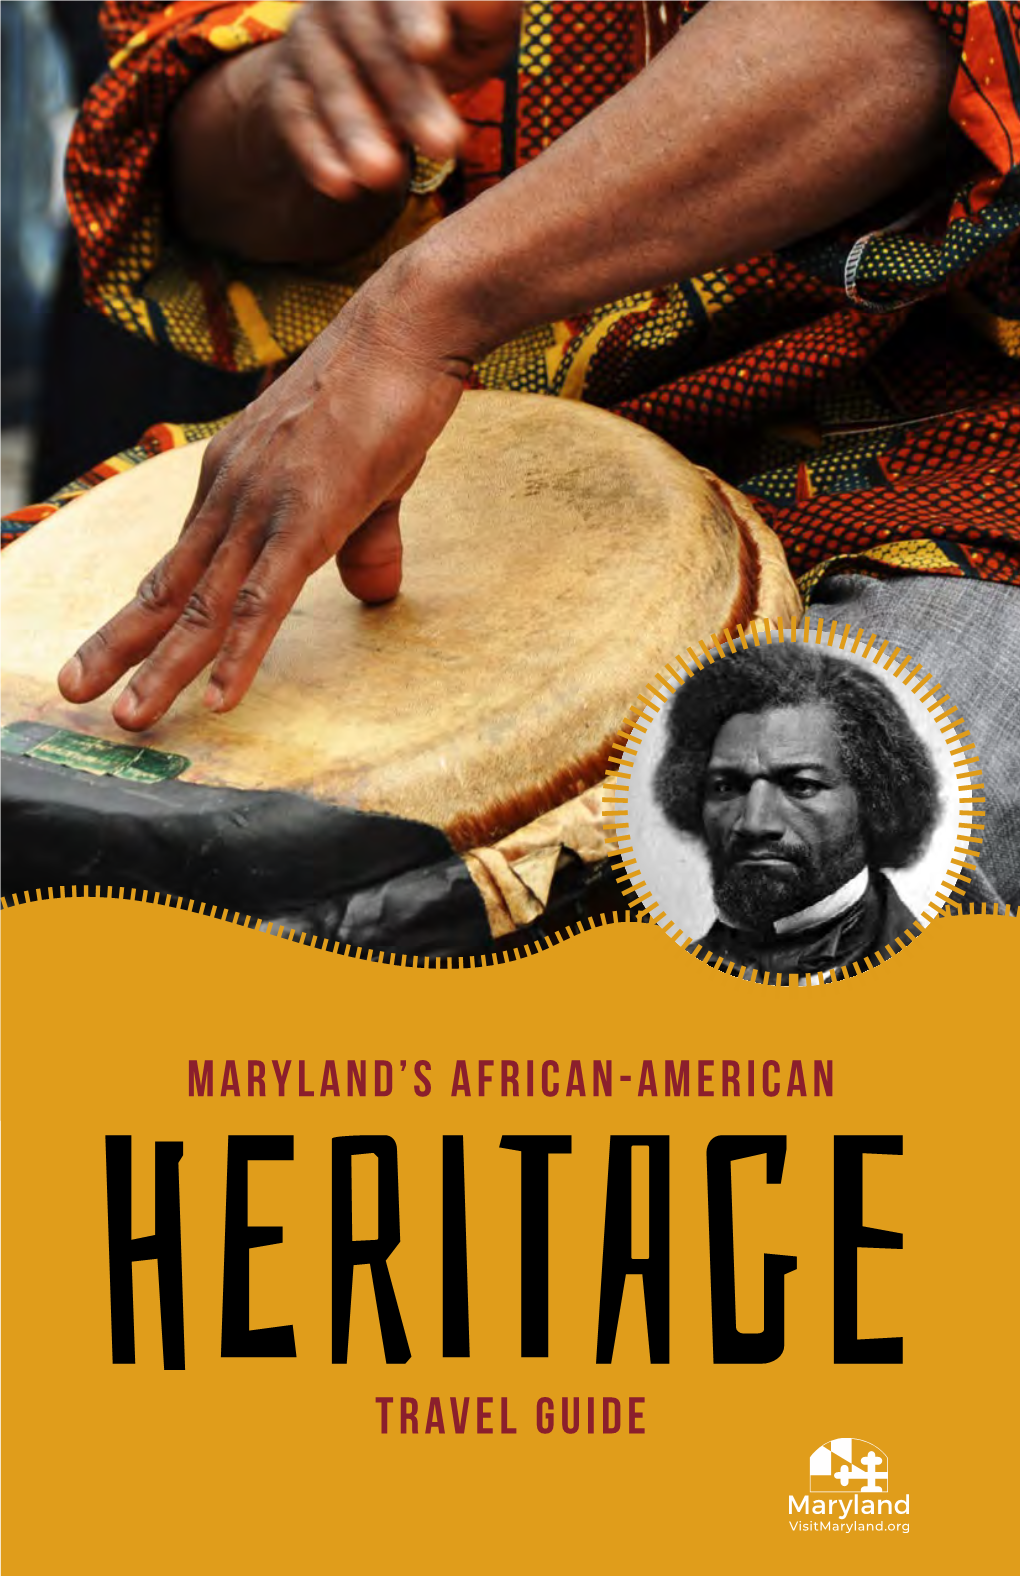 Travel Guide Maryland's African-American